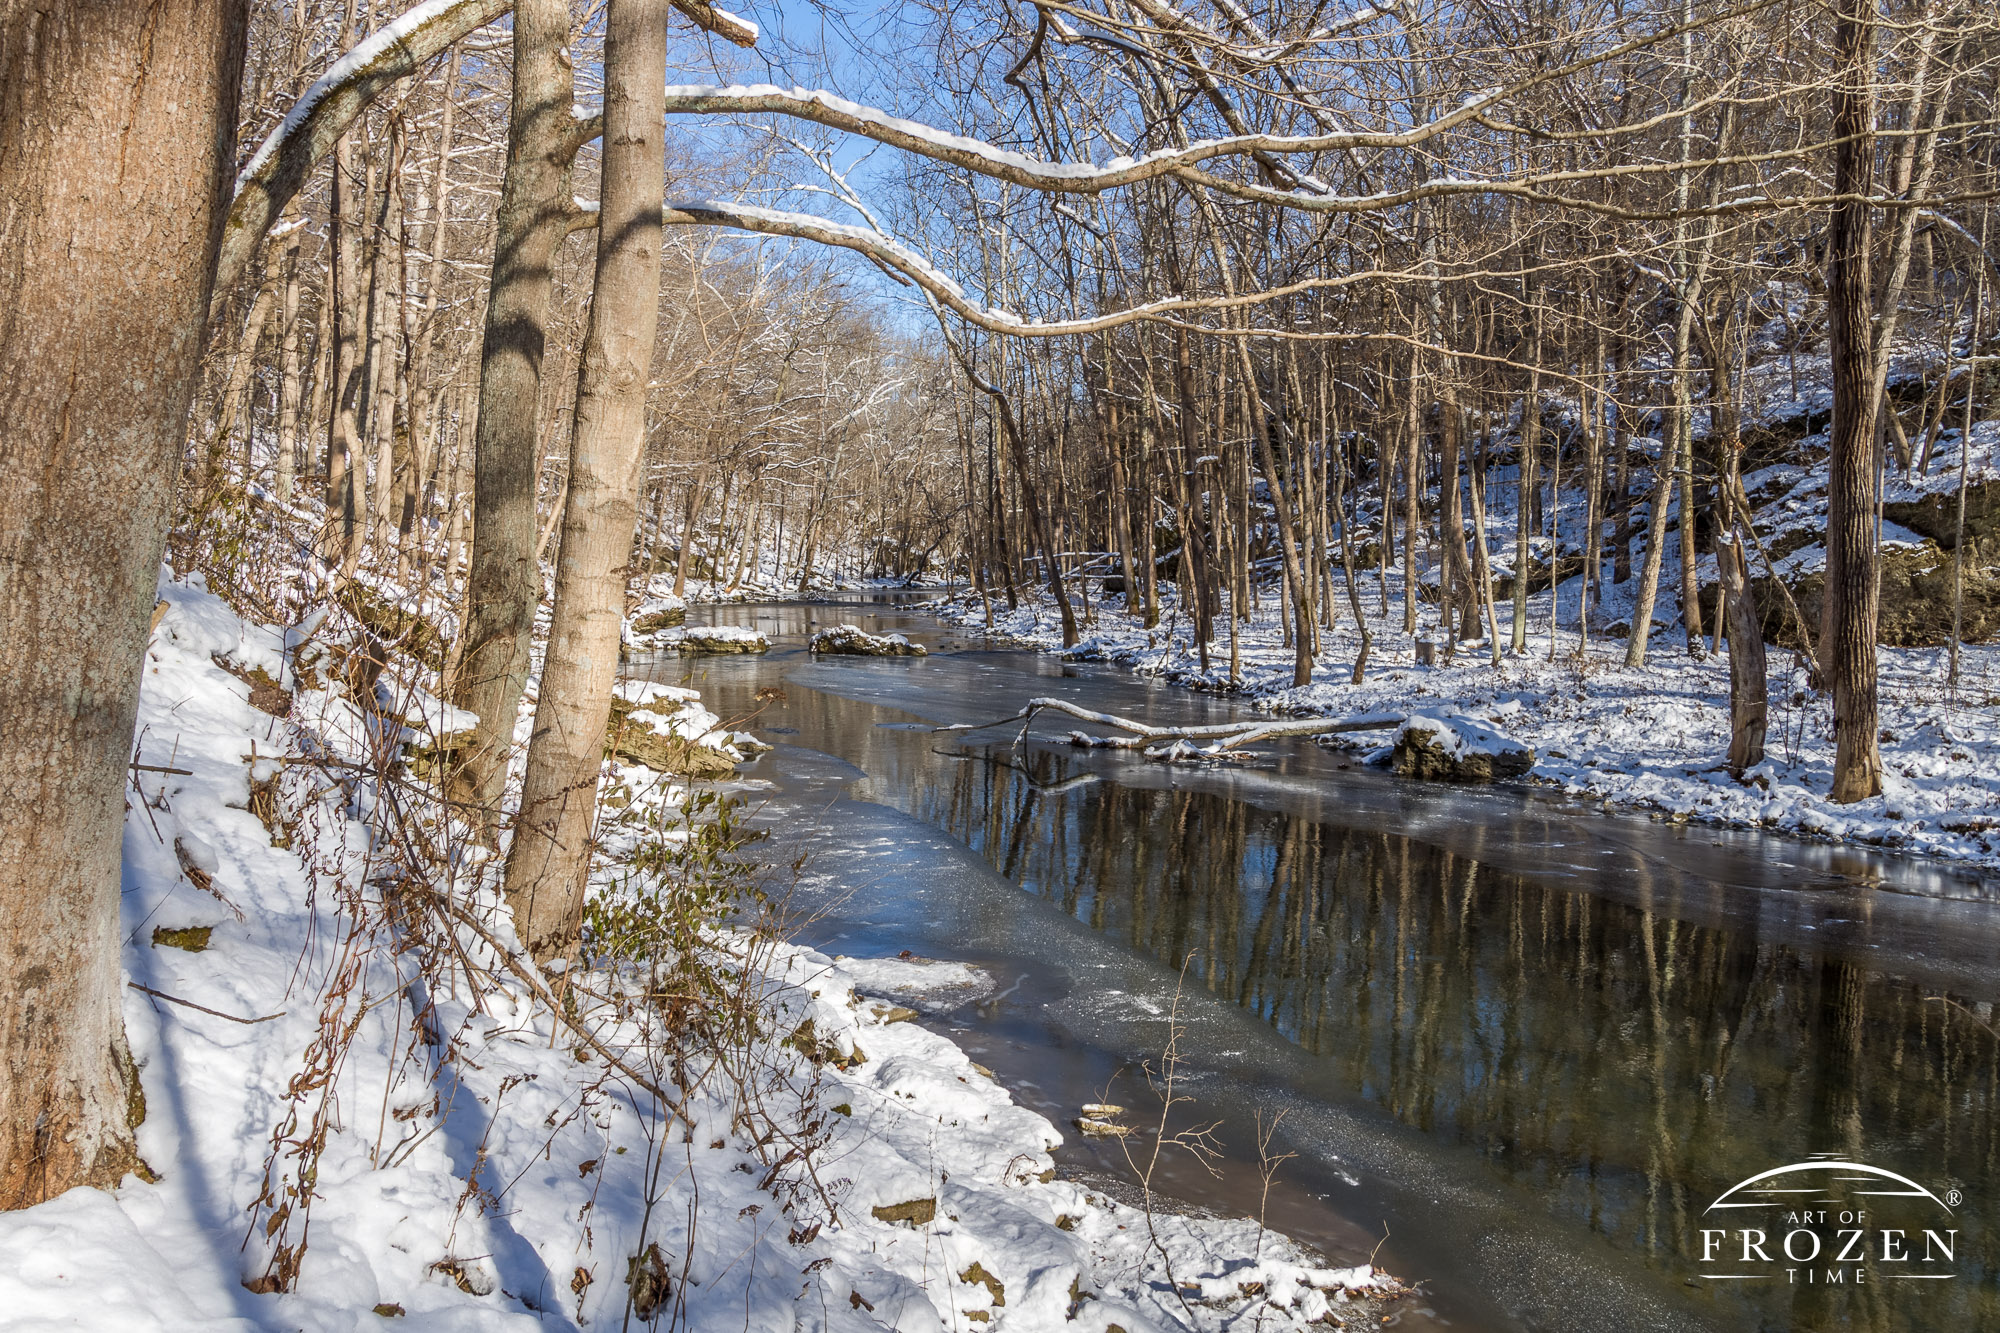 The Little Miami River gently flows by ice and thick snow as it passes through Clifton Gorge under blue skies and bright sunlight